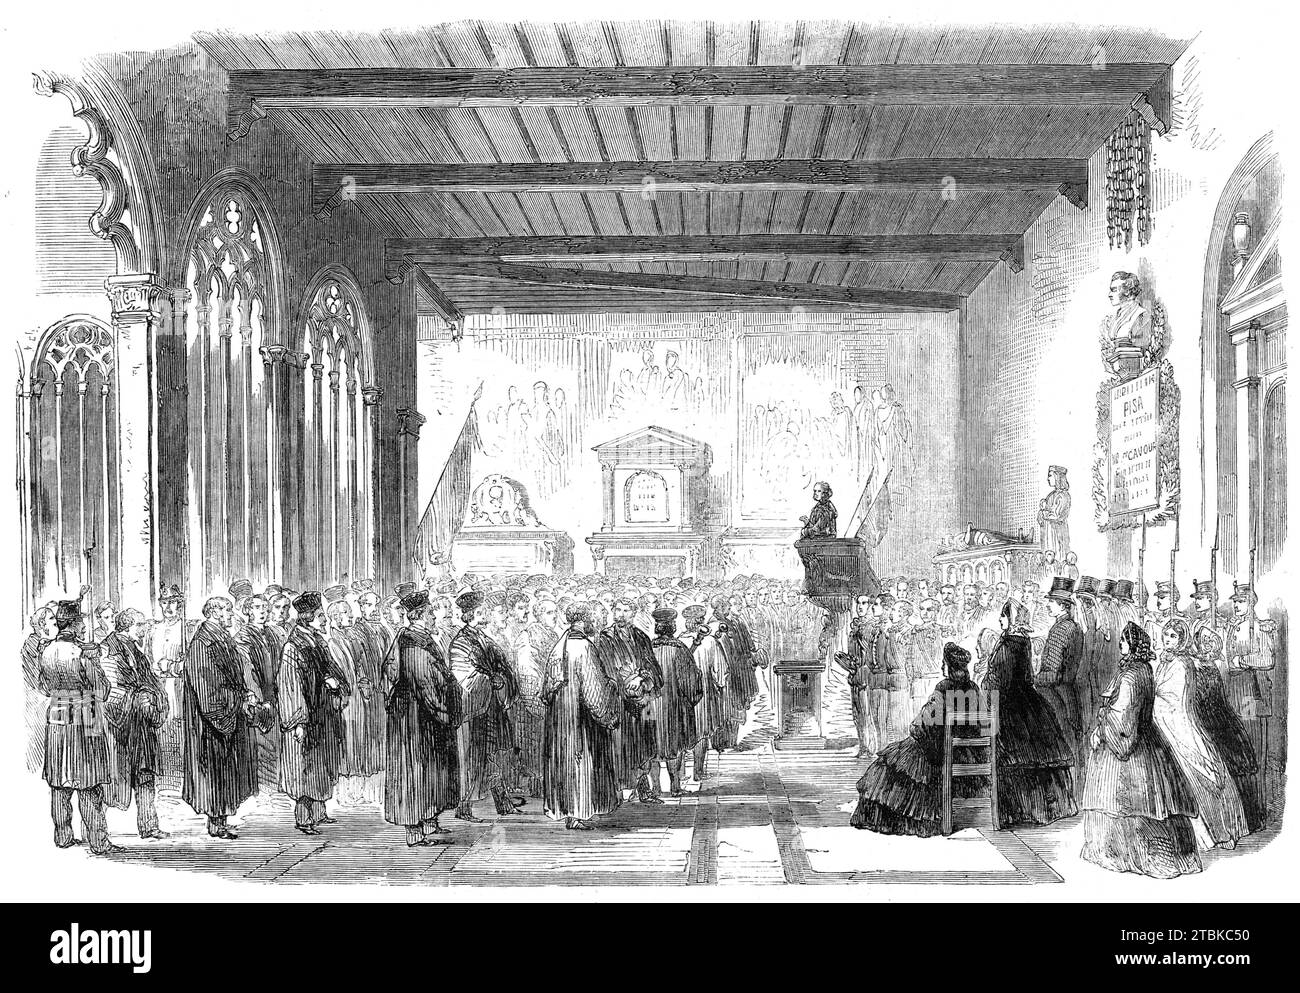 Inauguration of Cavour's Monument in the Campo Santo at Pisa, 1861. 'Pisa possesses in her celebrated Campo Santo the most storied, the most remarkable, and the most beautiful burying-place in Europe...The task of pronouncing an appropriate oration was intrusted to Signor Villari, the Professor of the Philosophy of History in the University, and well known to the literary world of Europe...His oration was much applauded, but the passage which drew forth the most enthusiastic plaudits from an audience composed mainly, it is to be observed, of university professors and city magistrates, was that Stock Photo